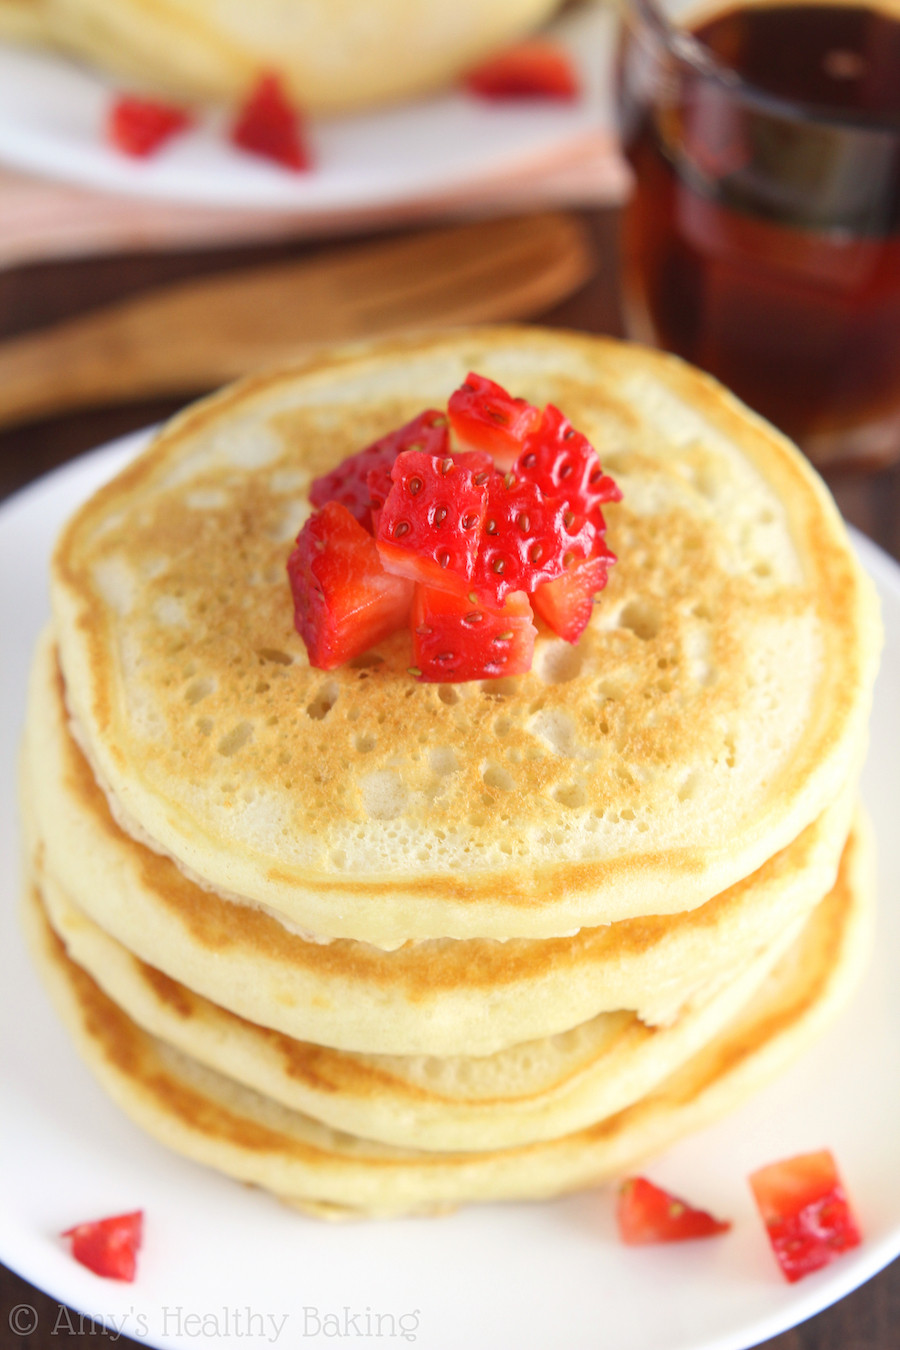 Are Pancakes Healthy
 The Ultimate Healthy Buttermilk Pancakes